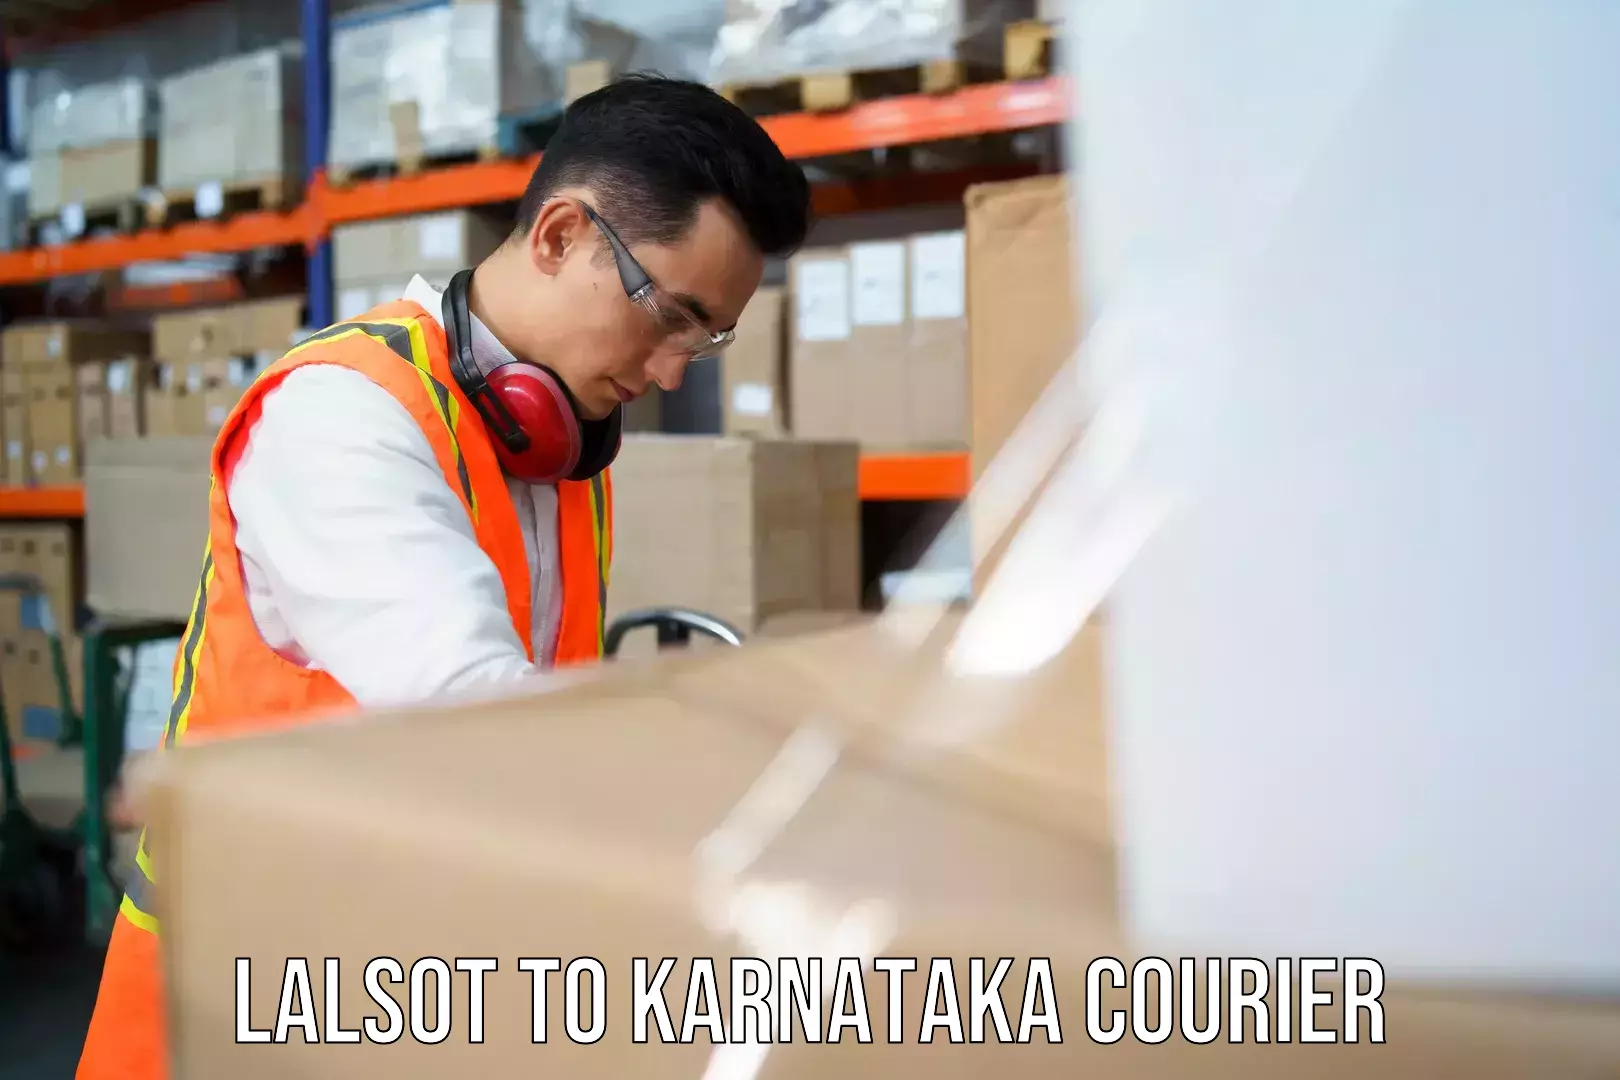 Nationwide shipping capabilities Lalsot to Ankola